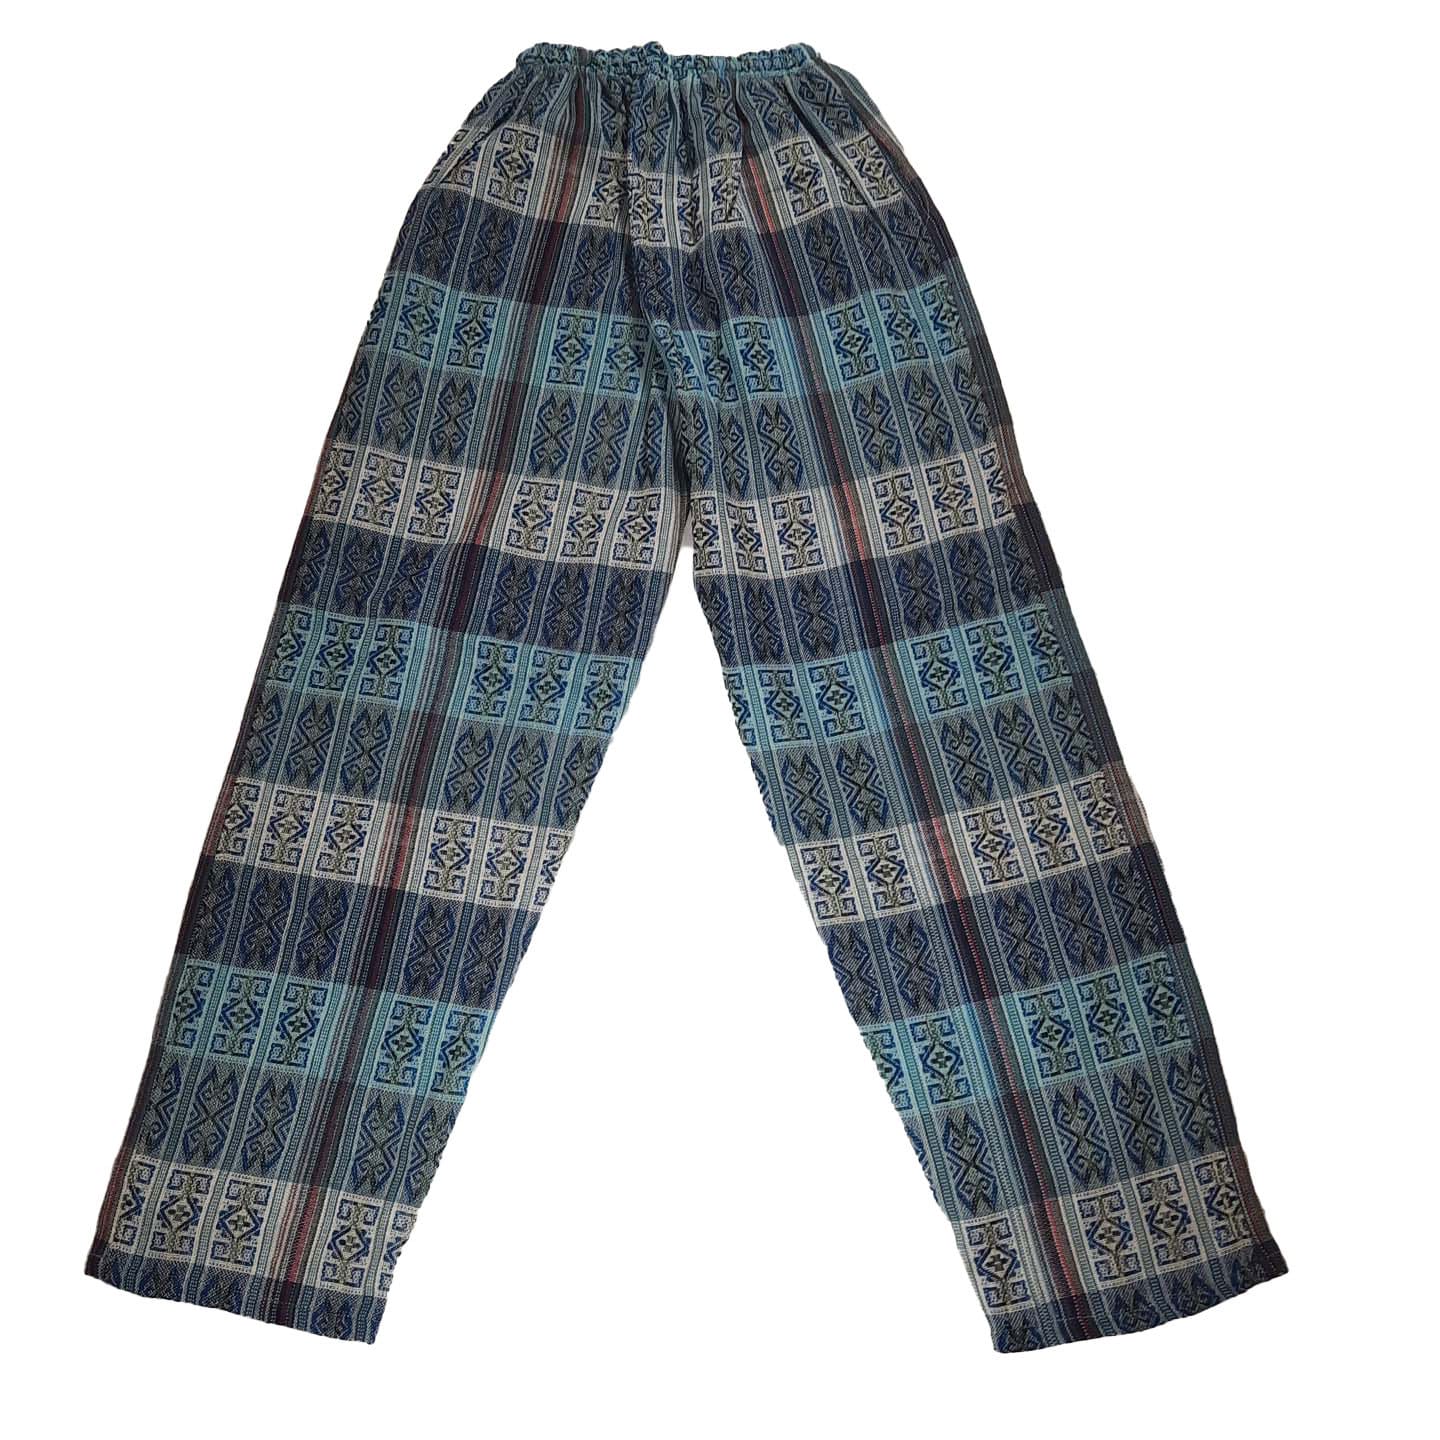 Unisex Hippie Mens Pants Size M | Comfortable Clothes | Lounge Wear | Womens Pants with Hidden Pockets | Blue Teal | Father's Day Gift